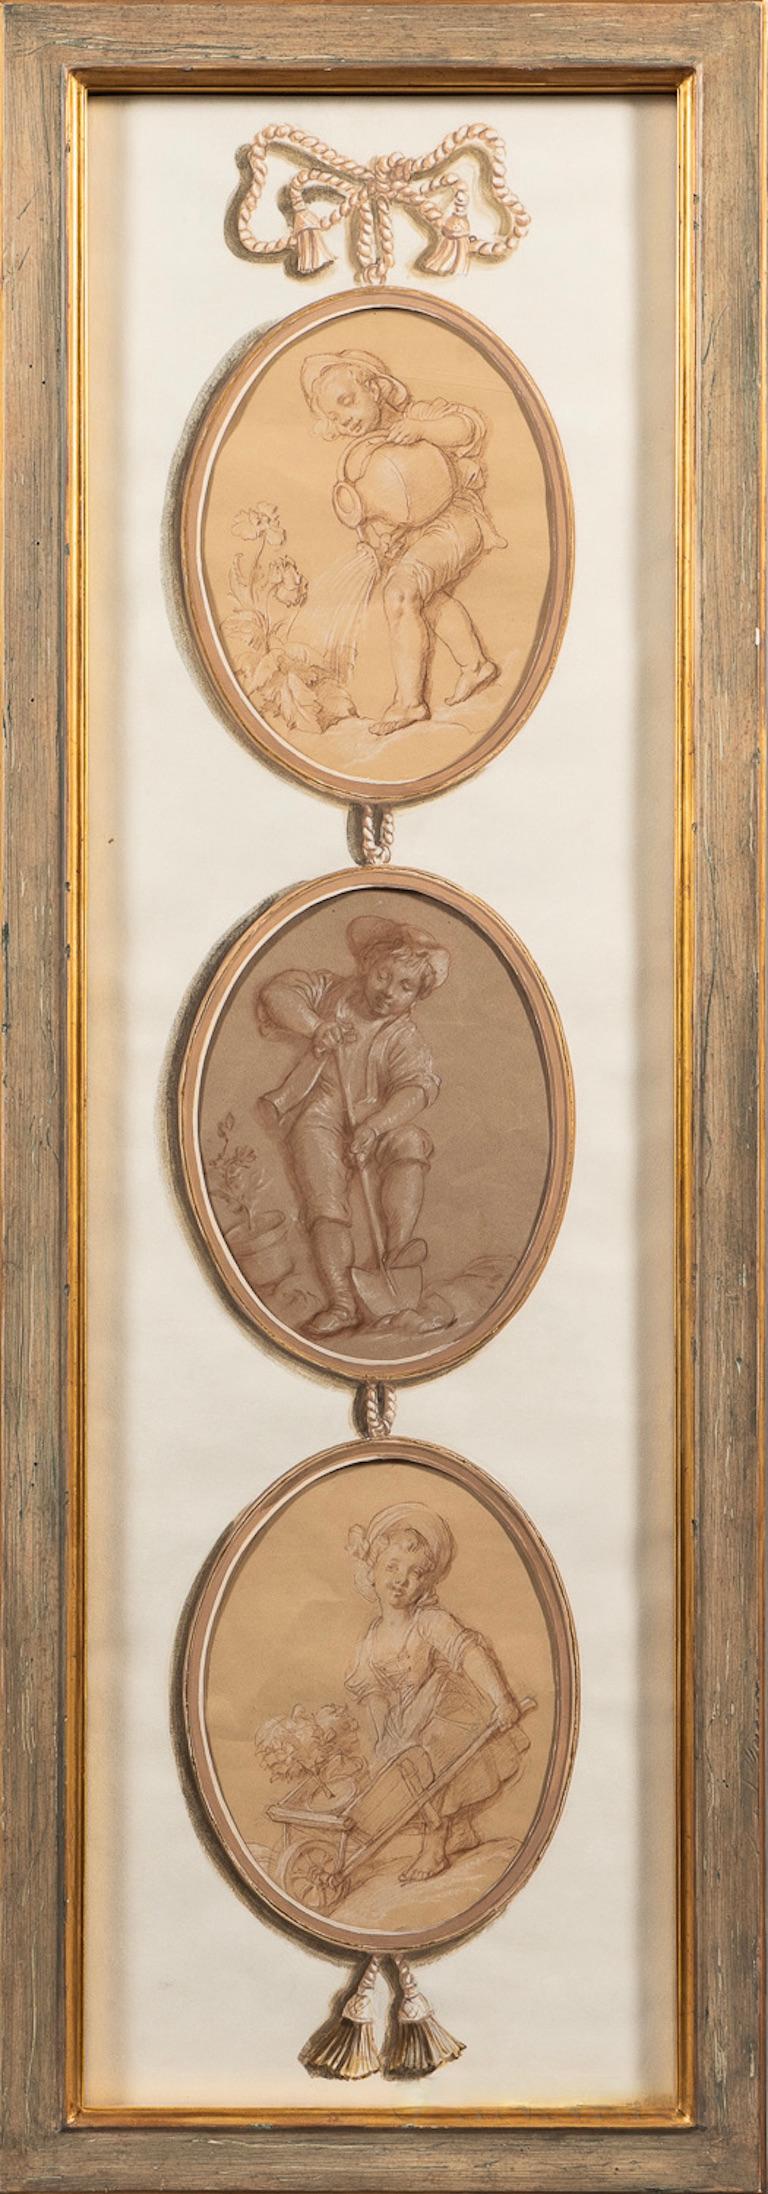 Pair of French School drawings in 18th century style. Hand drawn in Old Master Technique. Boucher School style

Pair of Trompe l'Oeil Three-drop Panels 
Unsigned. 
Red and white chalk on paper presented in gouache and watercolor embellished mats